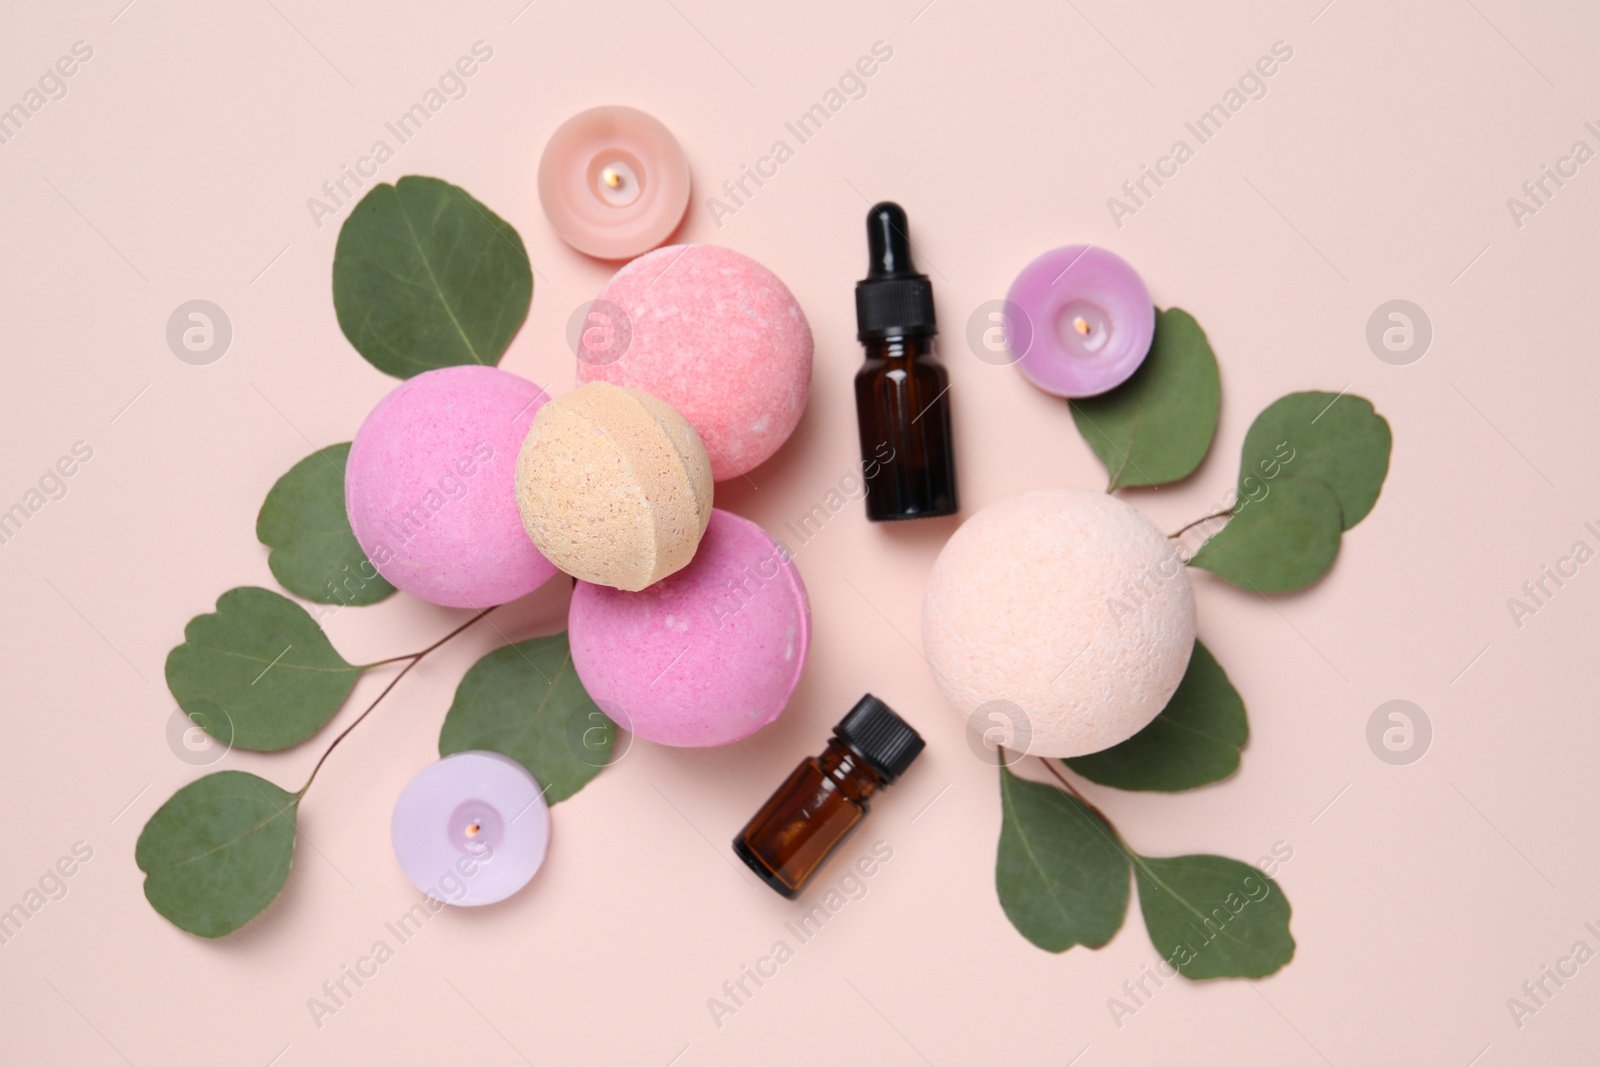 Photo of Bath bombs, eucalyptus leaves, burning candles and bottles on beige background, flat lay